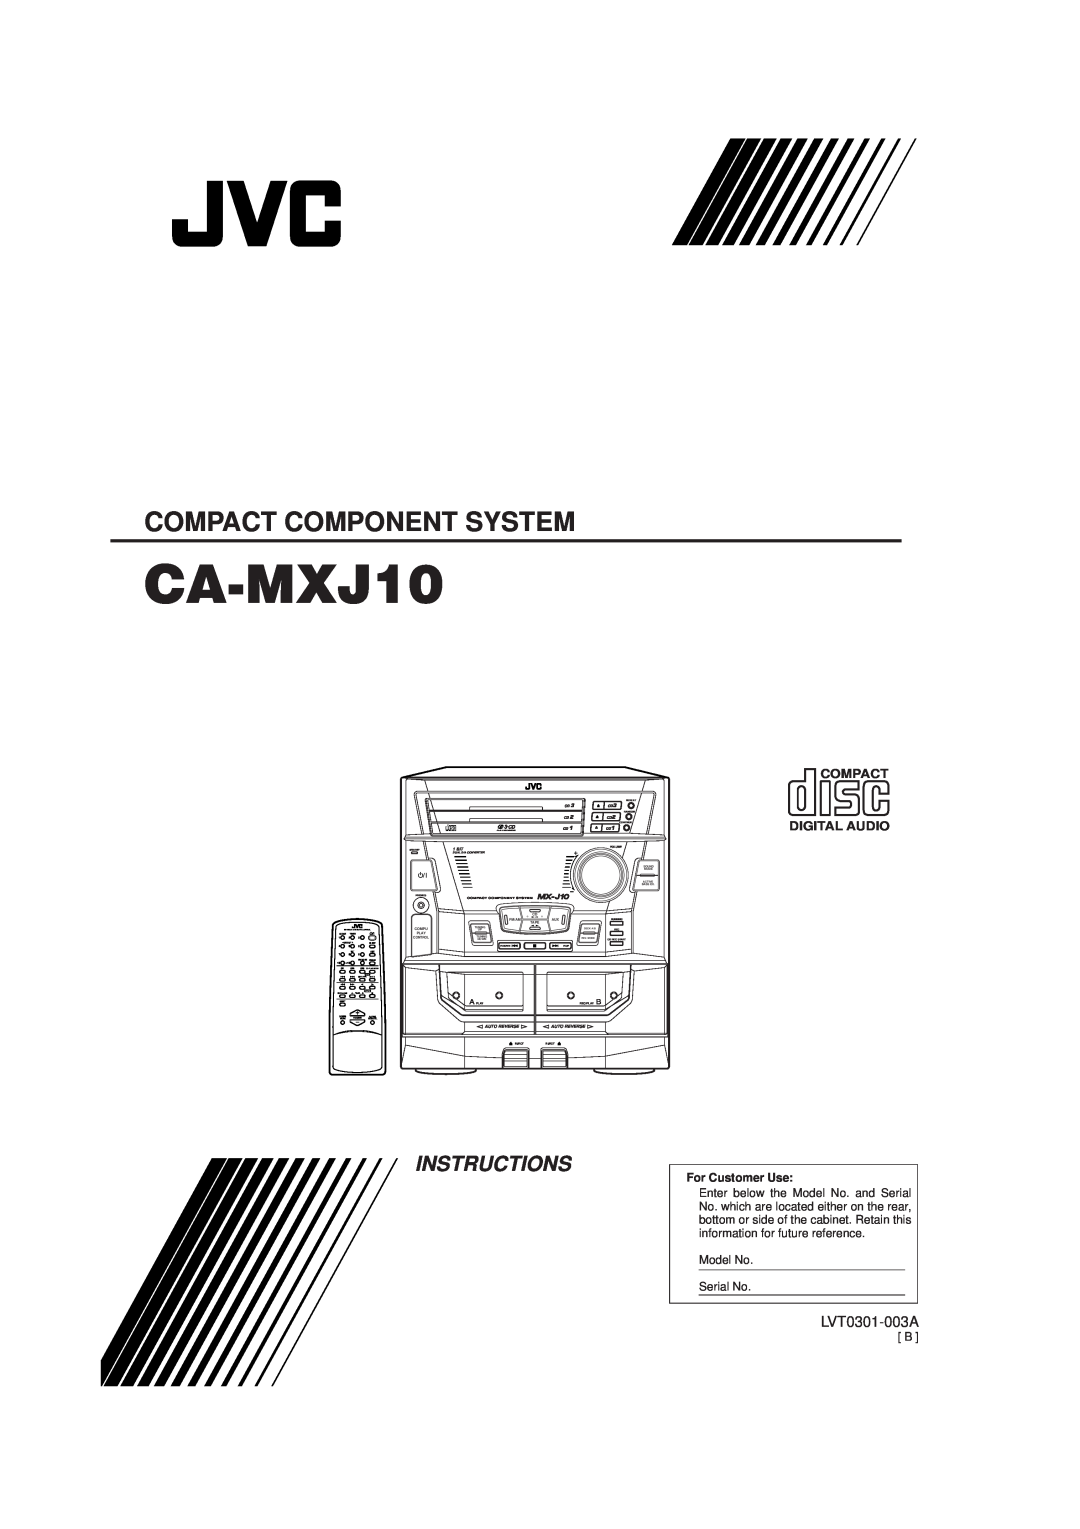 JVC CA-MXJ10 manual Compact Component System, Instructions, LVT0301-003A, Compact Digital Audio, For Customer Use, 1 BIT 